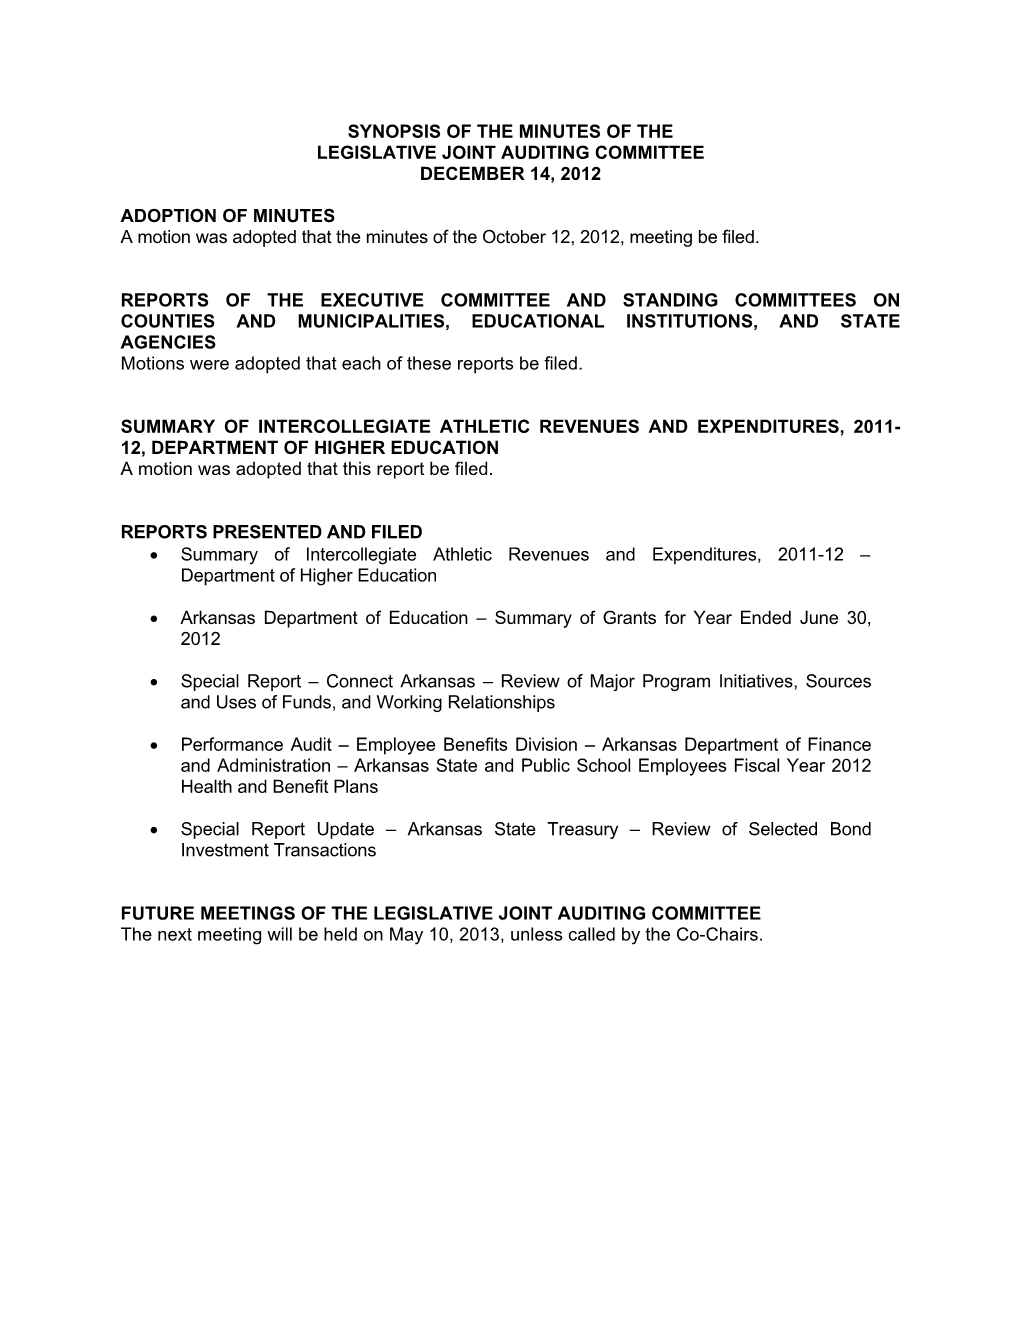 Synopsis of the Minutes of the Legislative Joint Auditing Committee December 14, 2012